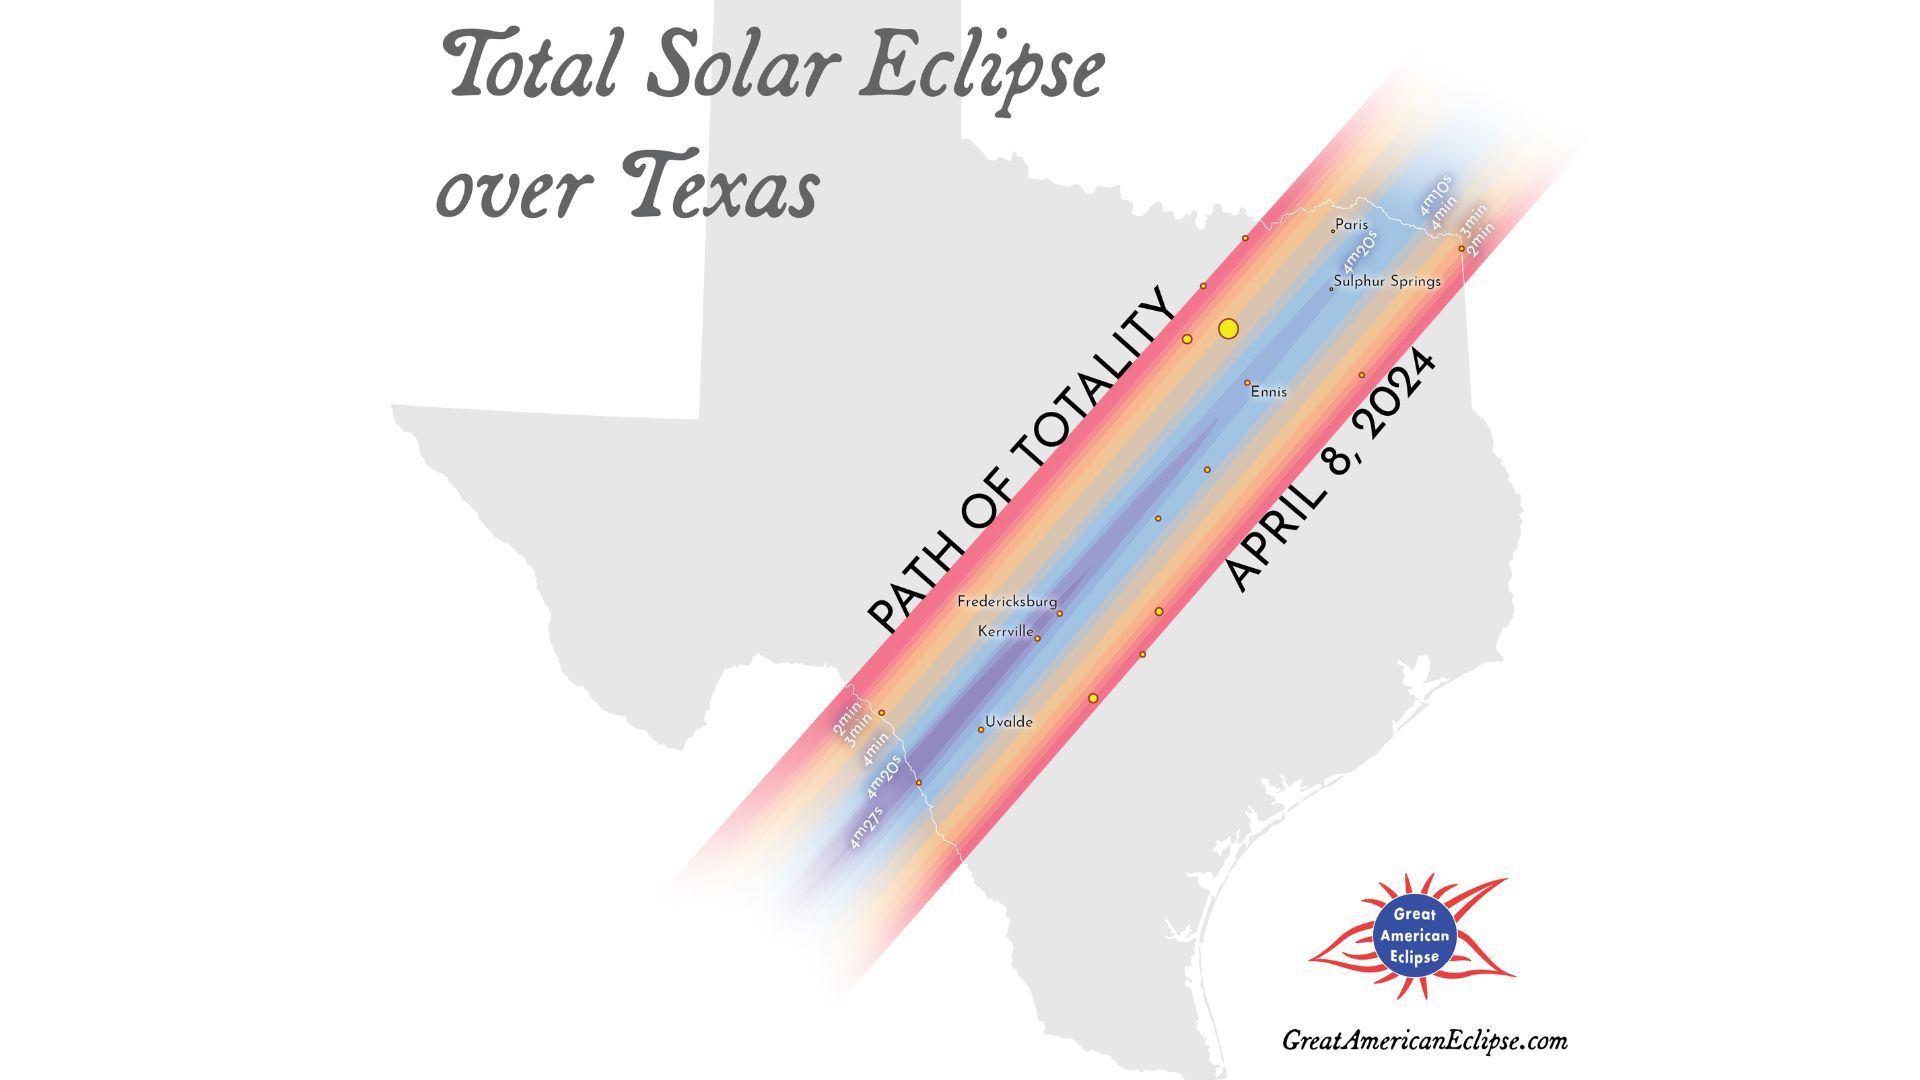 Where will the most crowded places be for the total solar eclipse on